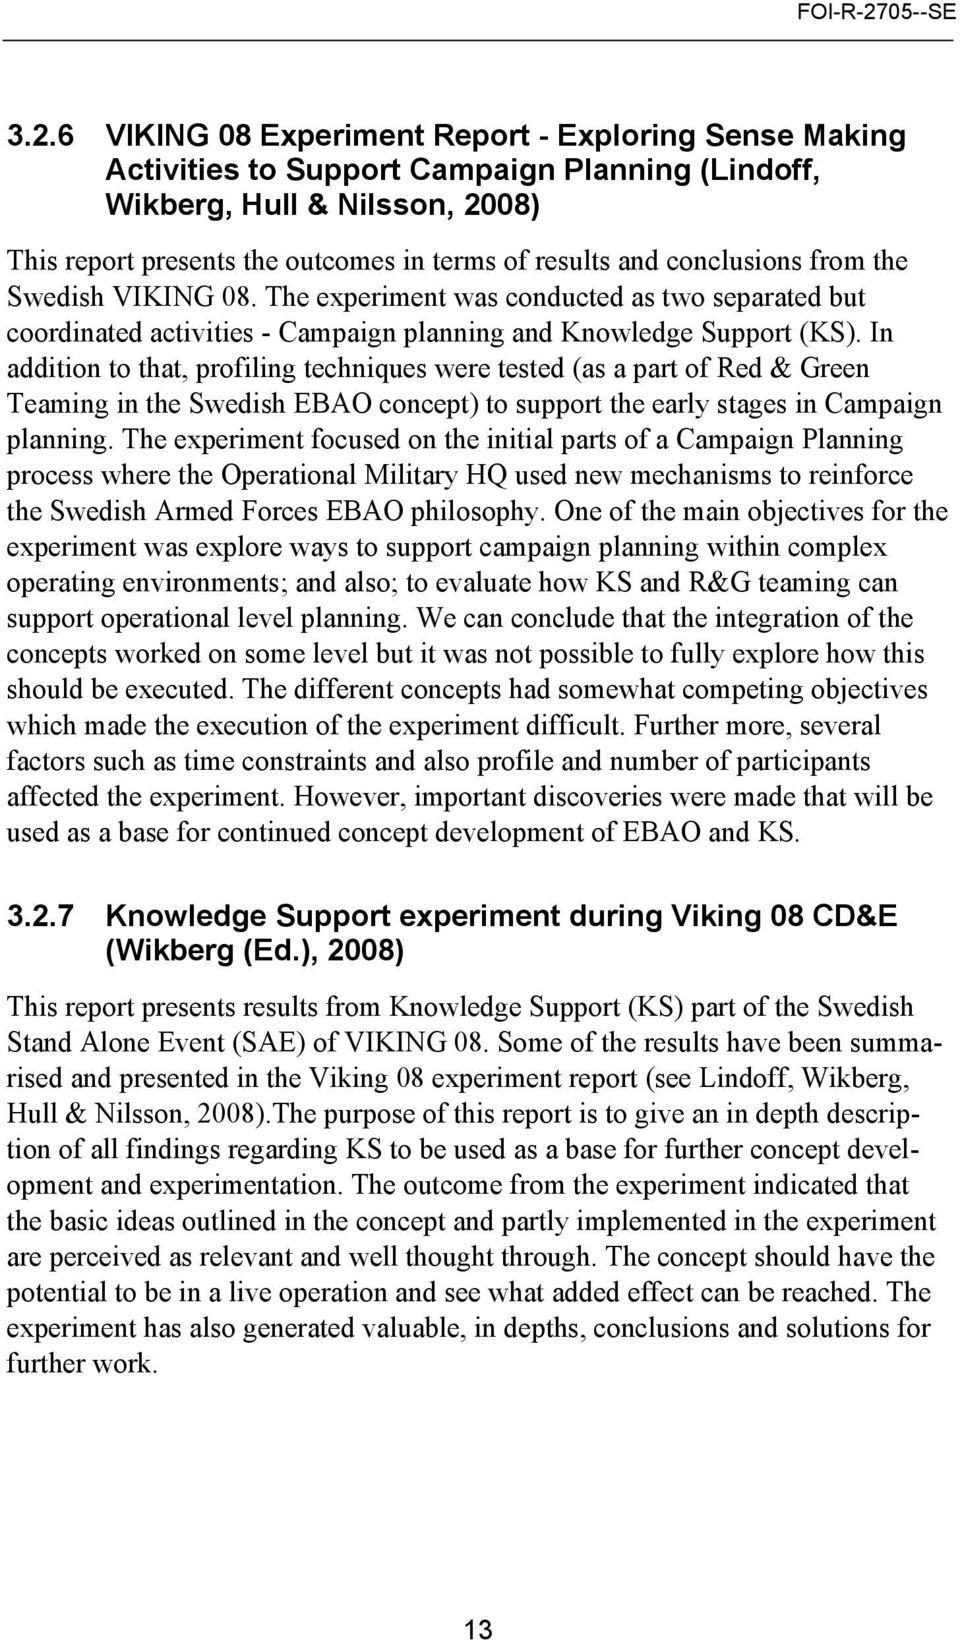 In addition to that, profiling techniques were tested (as a part of Red & Green Teaming in the Swedish EBAO concept) to support the early stages in Campaign planning.